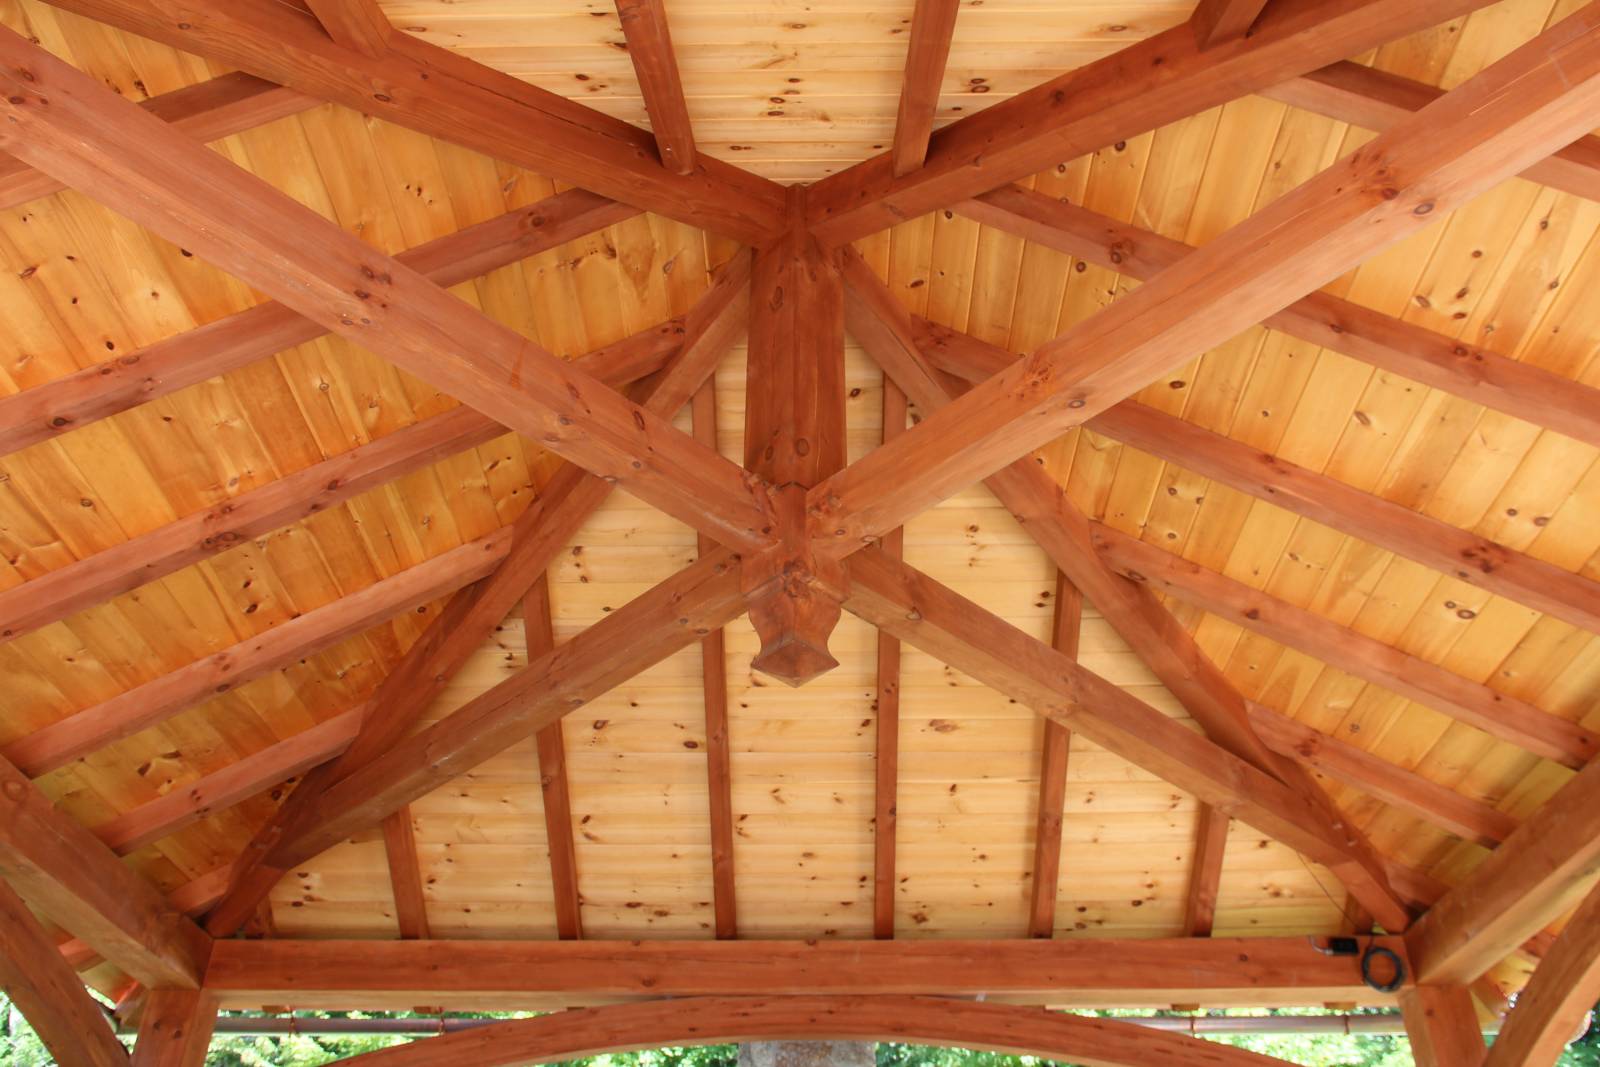 Boss pin • exposed tongue & groove pine ceiling with heavy timber rafters